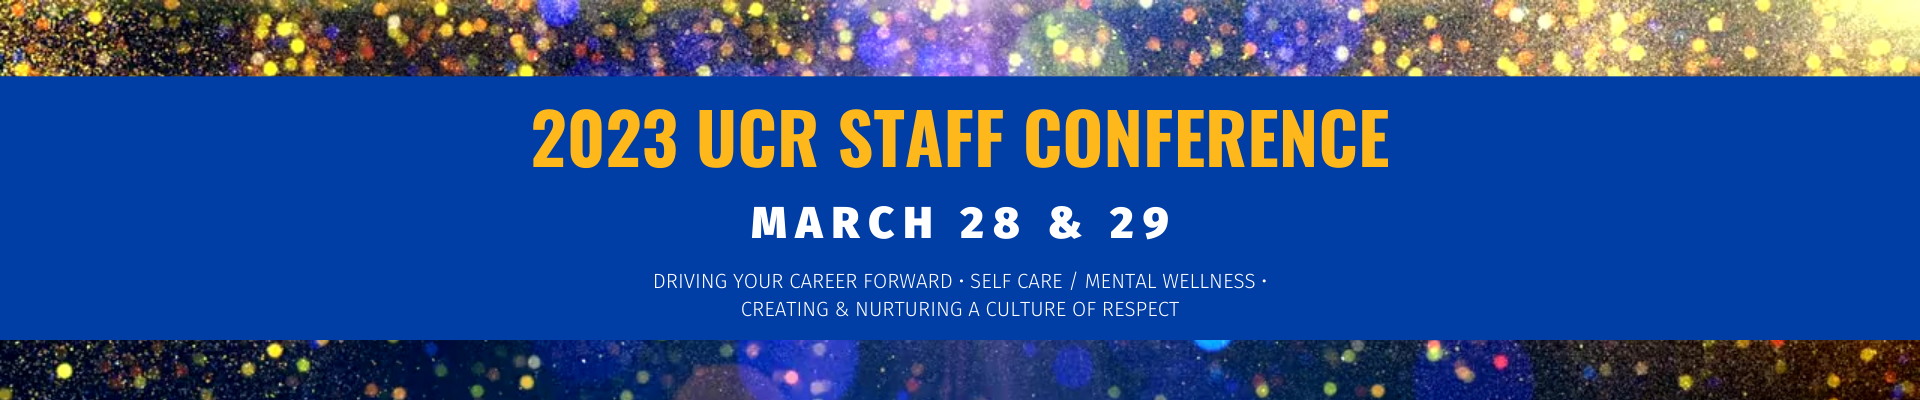 UCR Staff Conference March 28 and 29, 2023